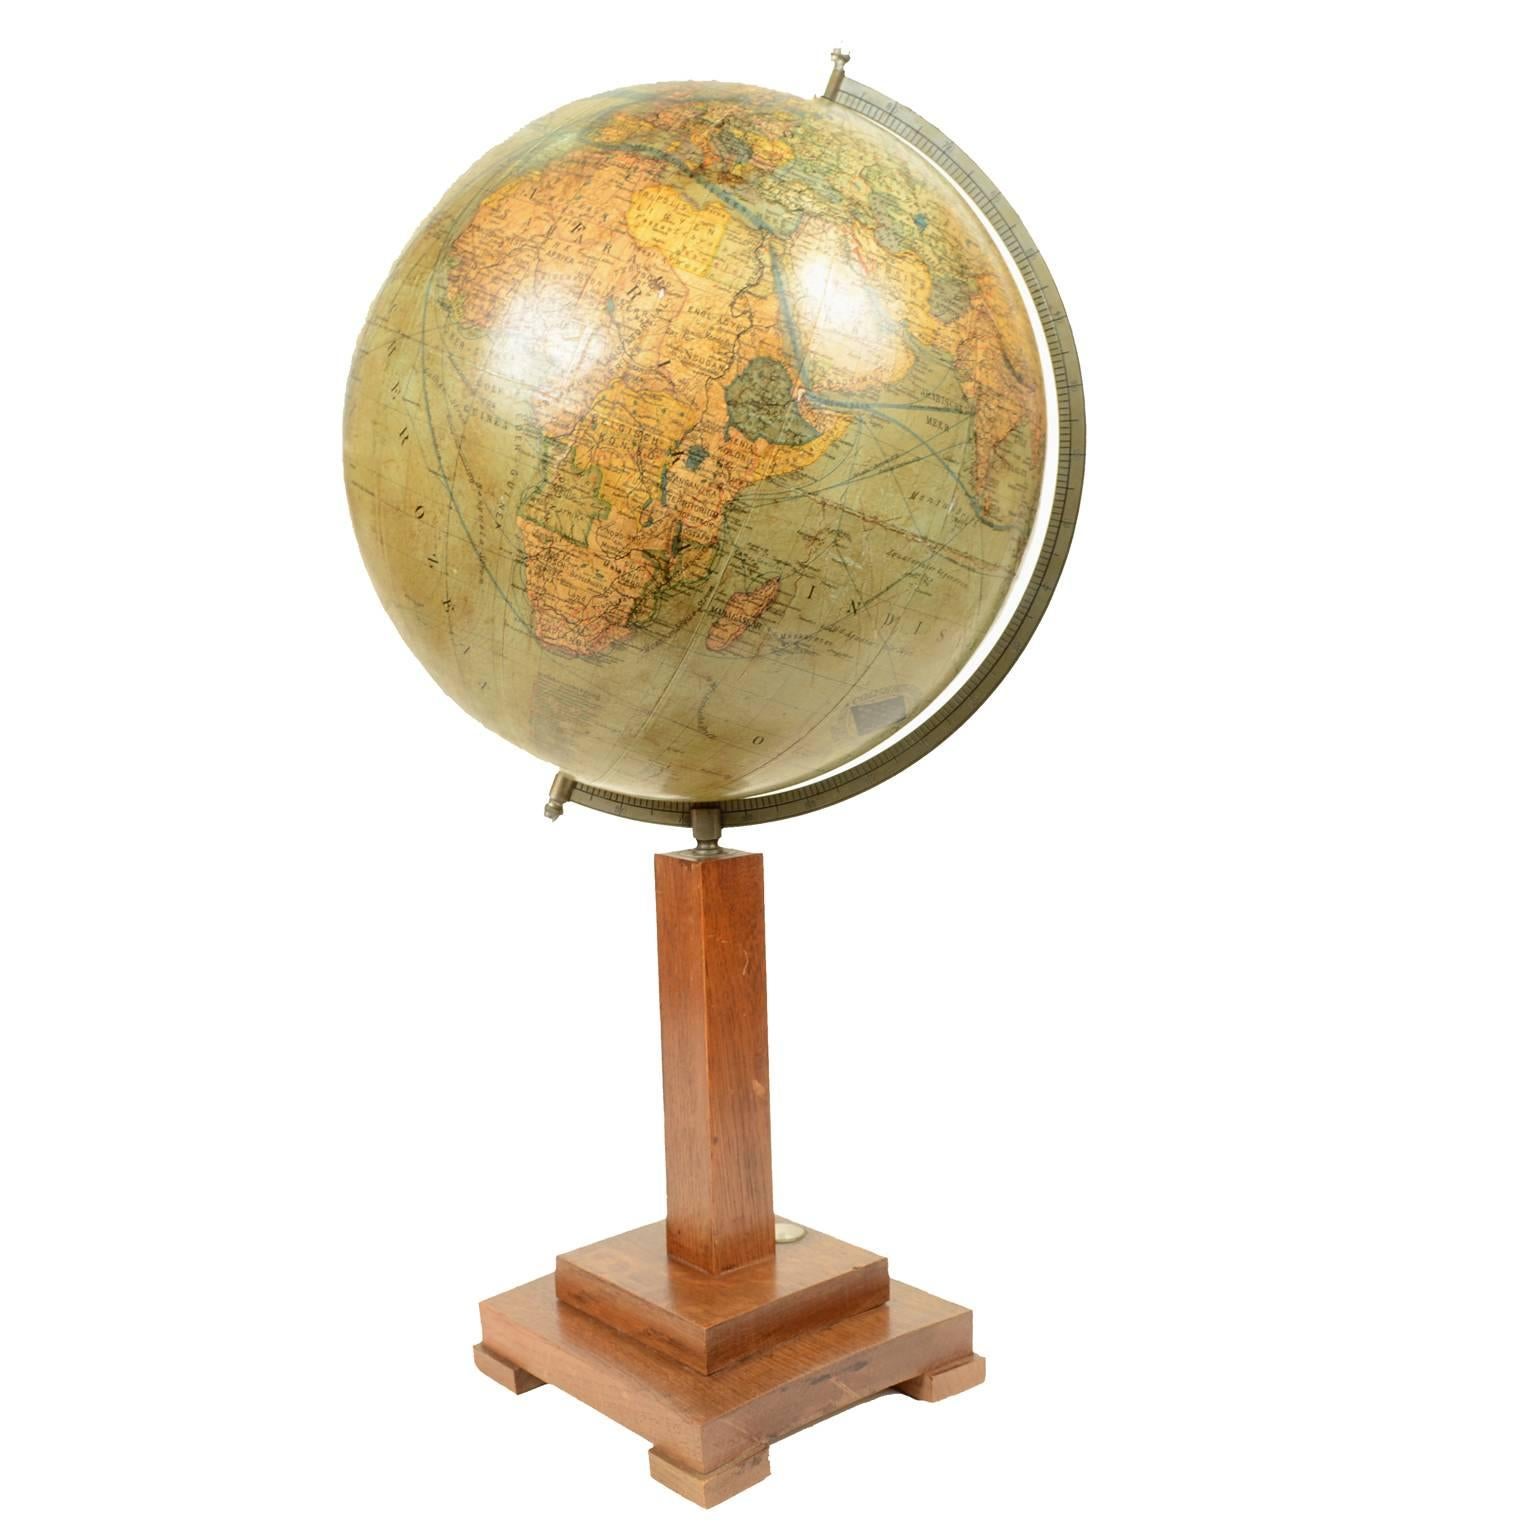 Globe pPublished in 1930s by Columbus Erdglobus